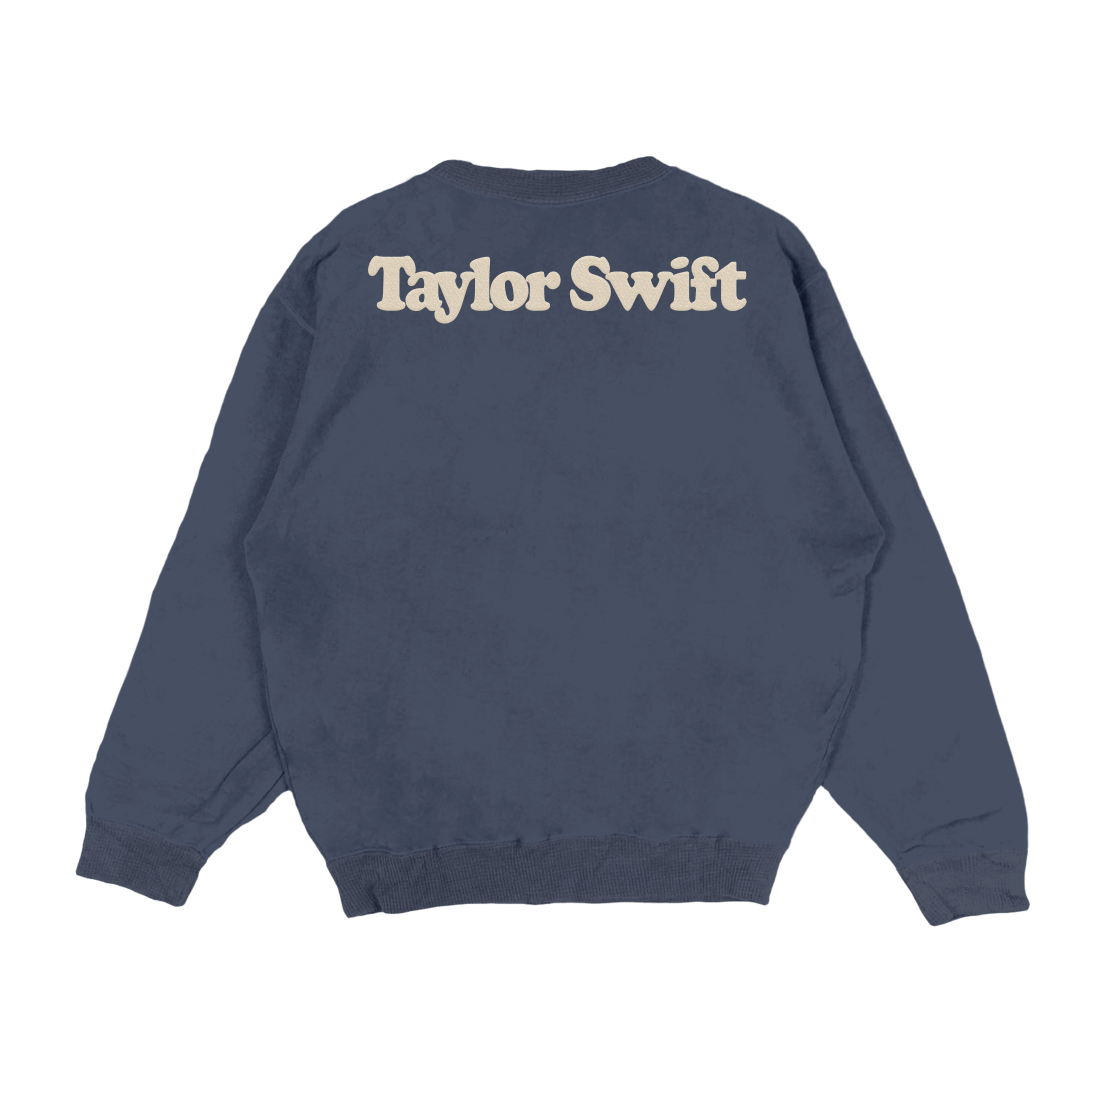 https://images.bravado.de/prod/product-assets/product-asset-data/taylor-swift/taylor-swift/products/505831/web/414939/image-thumb__414939__3000x3000_original/Taylor-Swift-Lost-in-the-Labyrinth-of-my-Mind-Longsleeves-blau-505831-414939.png